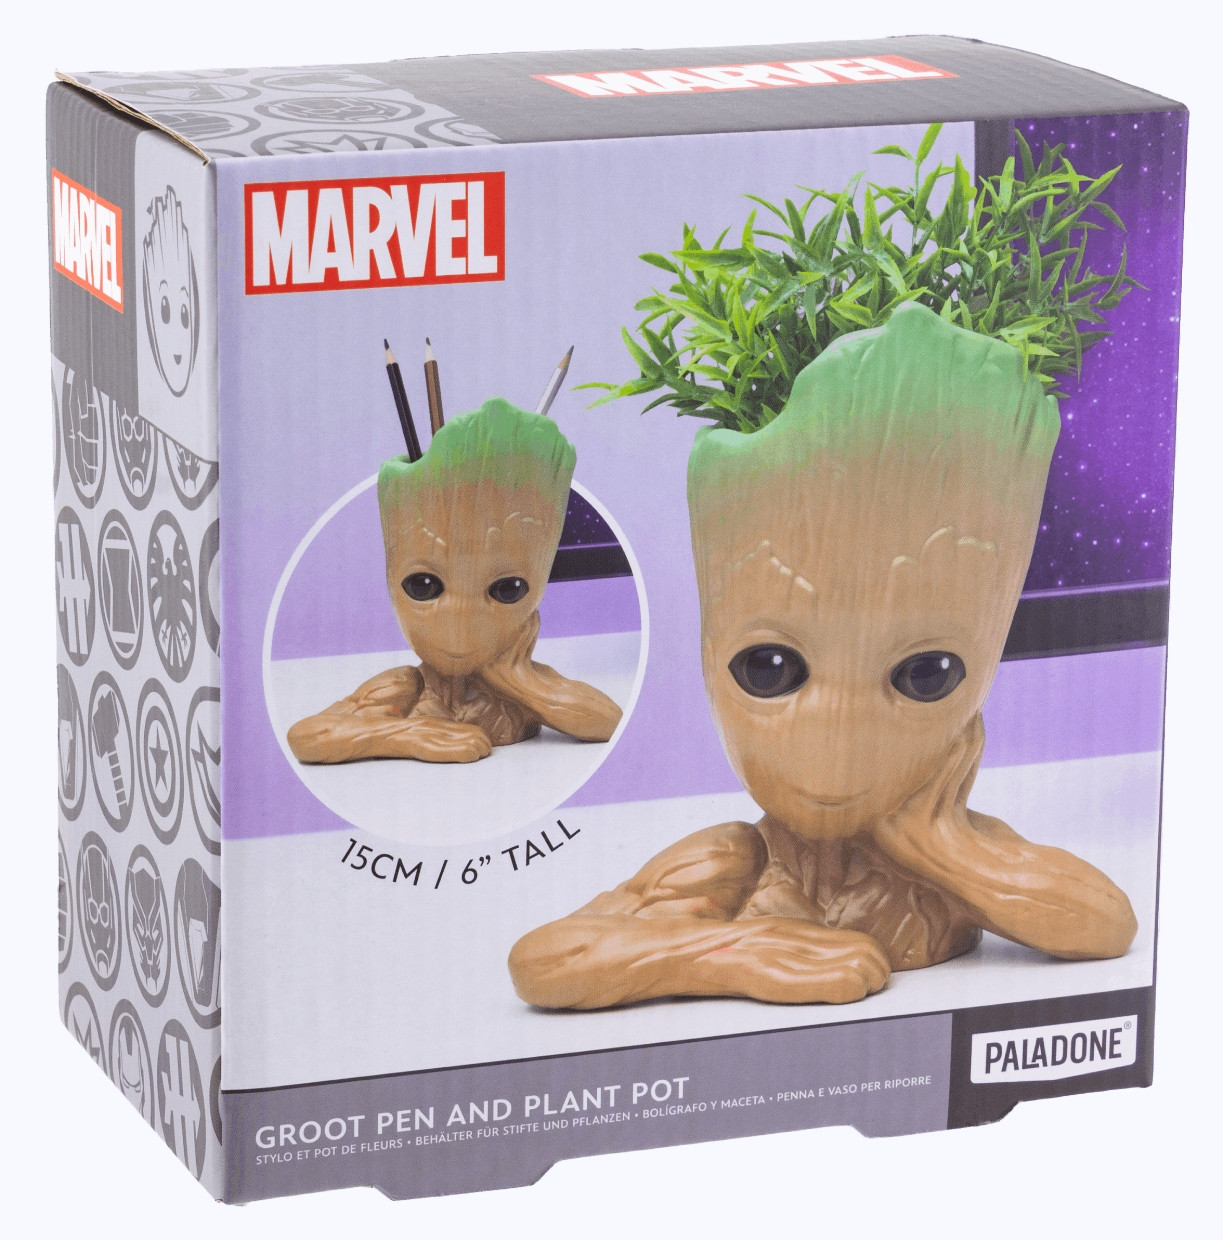 Marvel Guardians of the Galaxy - Groot Pen & Plant Pot